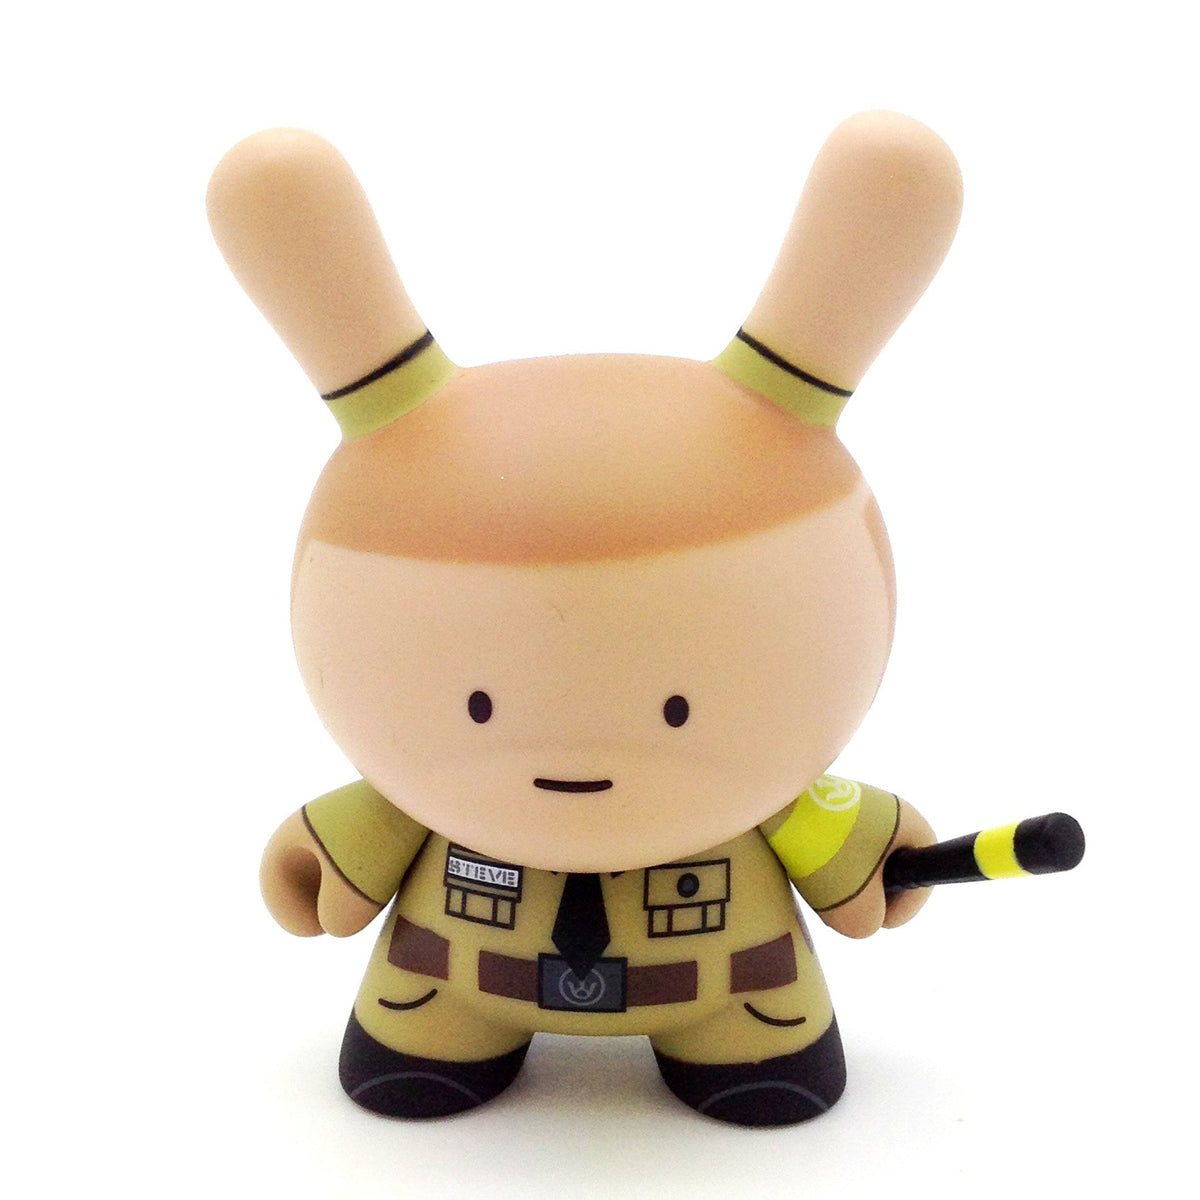 Dunny Evolved Series - Youth Outreach Program - Steve (Huck Gee) - Mindzai
